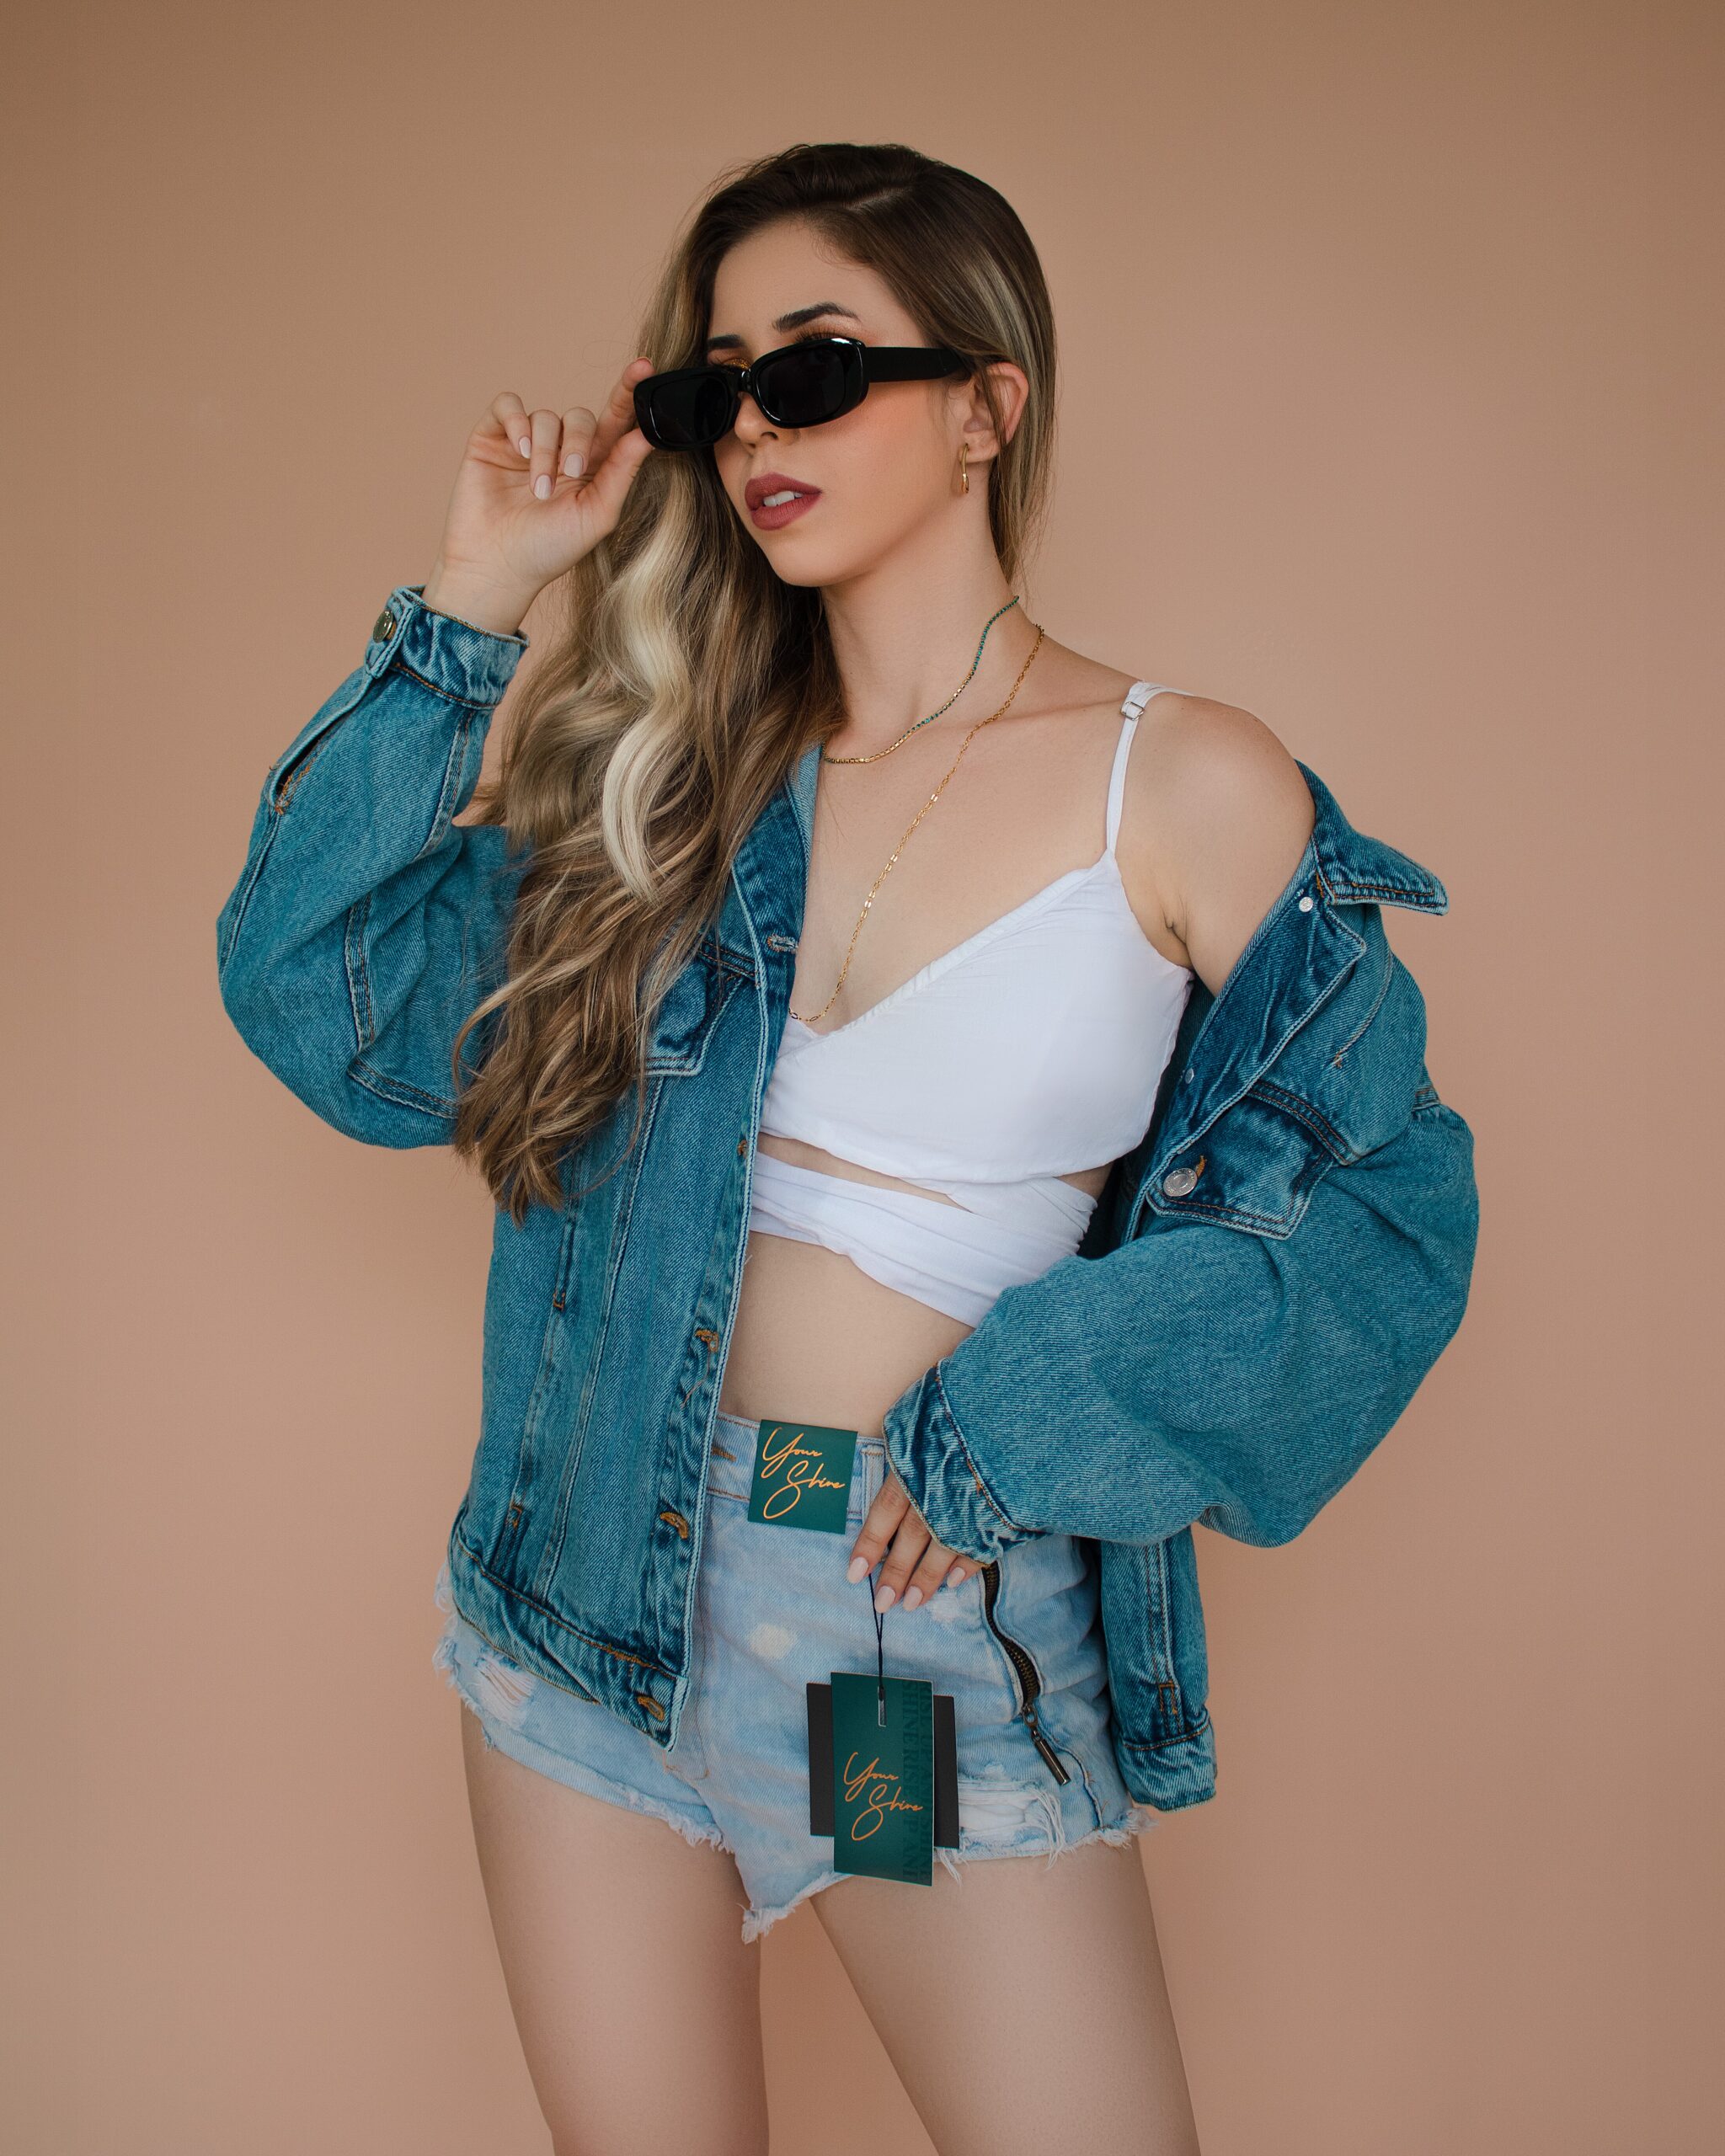 A woman wearing a sexy streetwear outfit